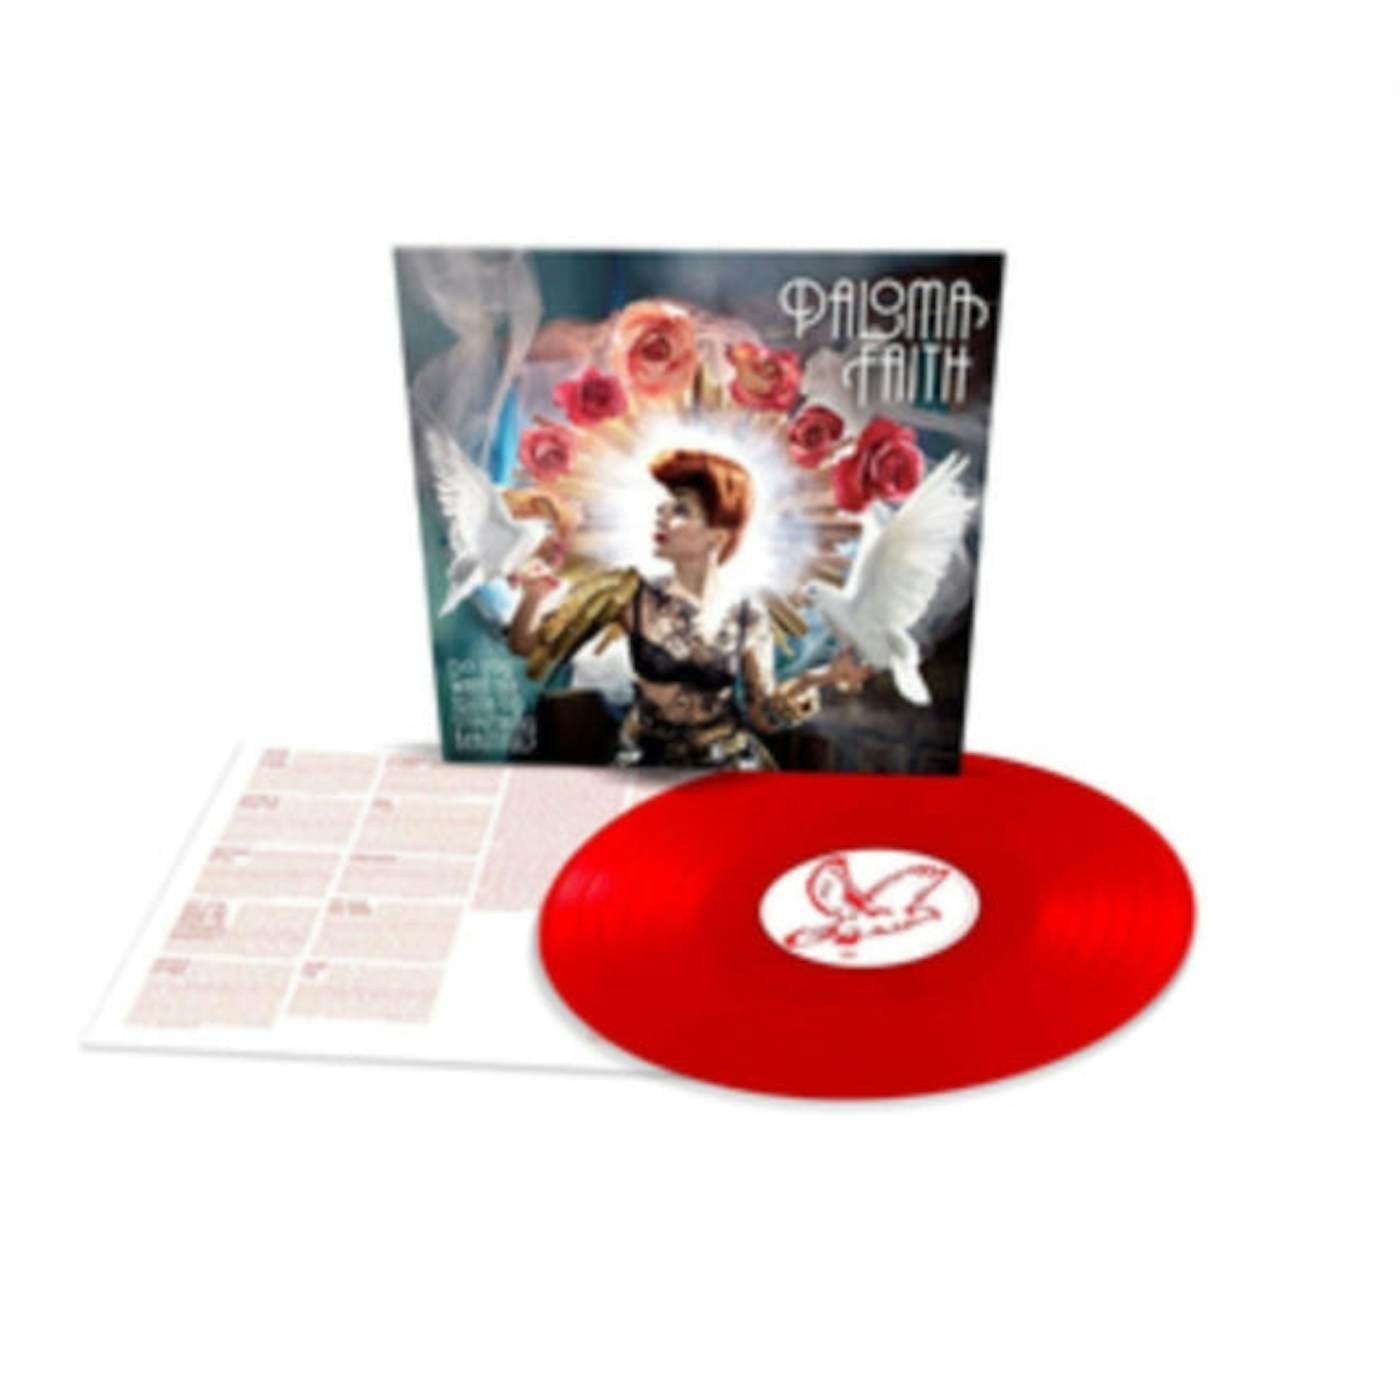 Paloma Faith LP Vinyl Record - Do You Want The Truth Or Something Beautiful?